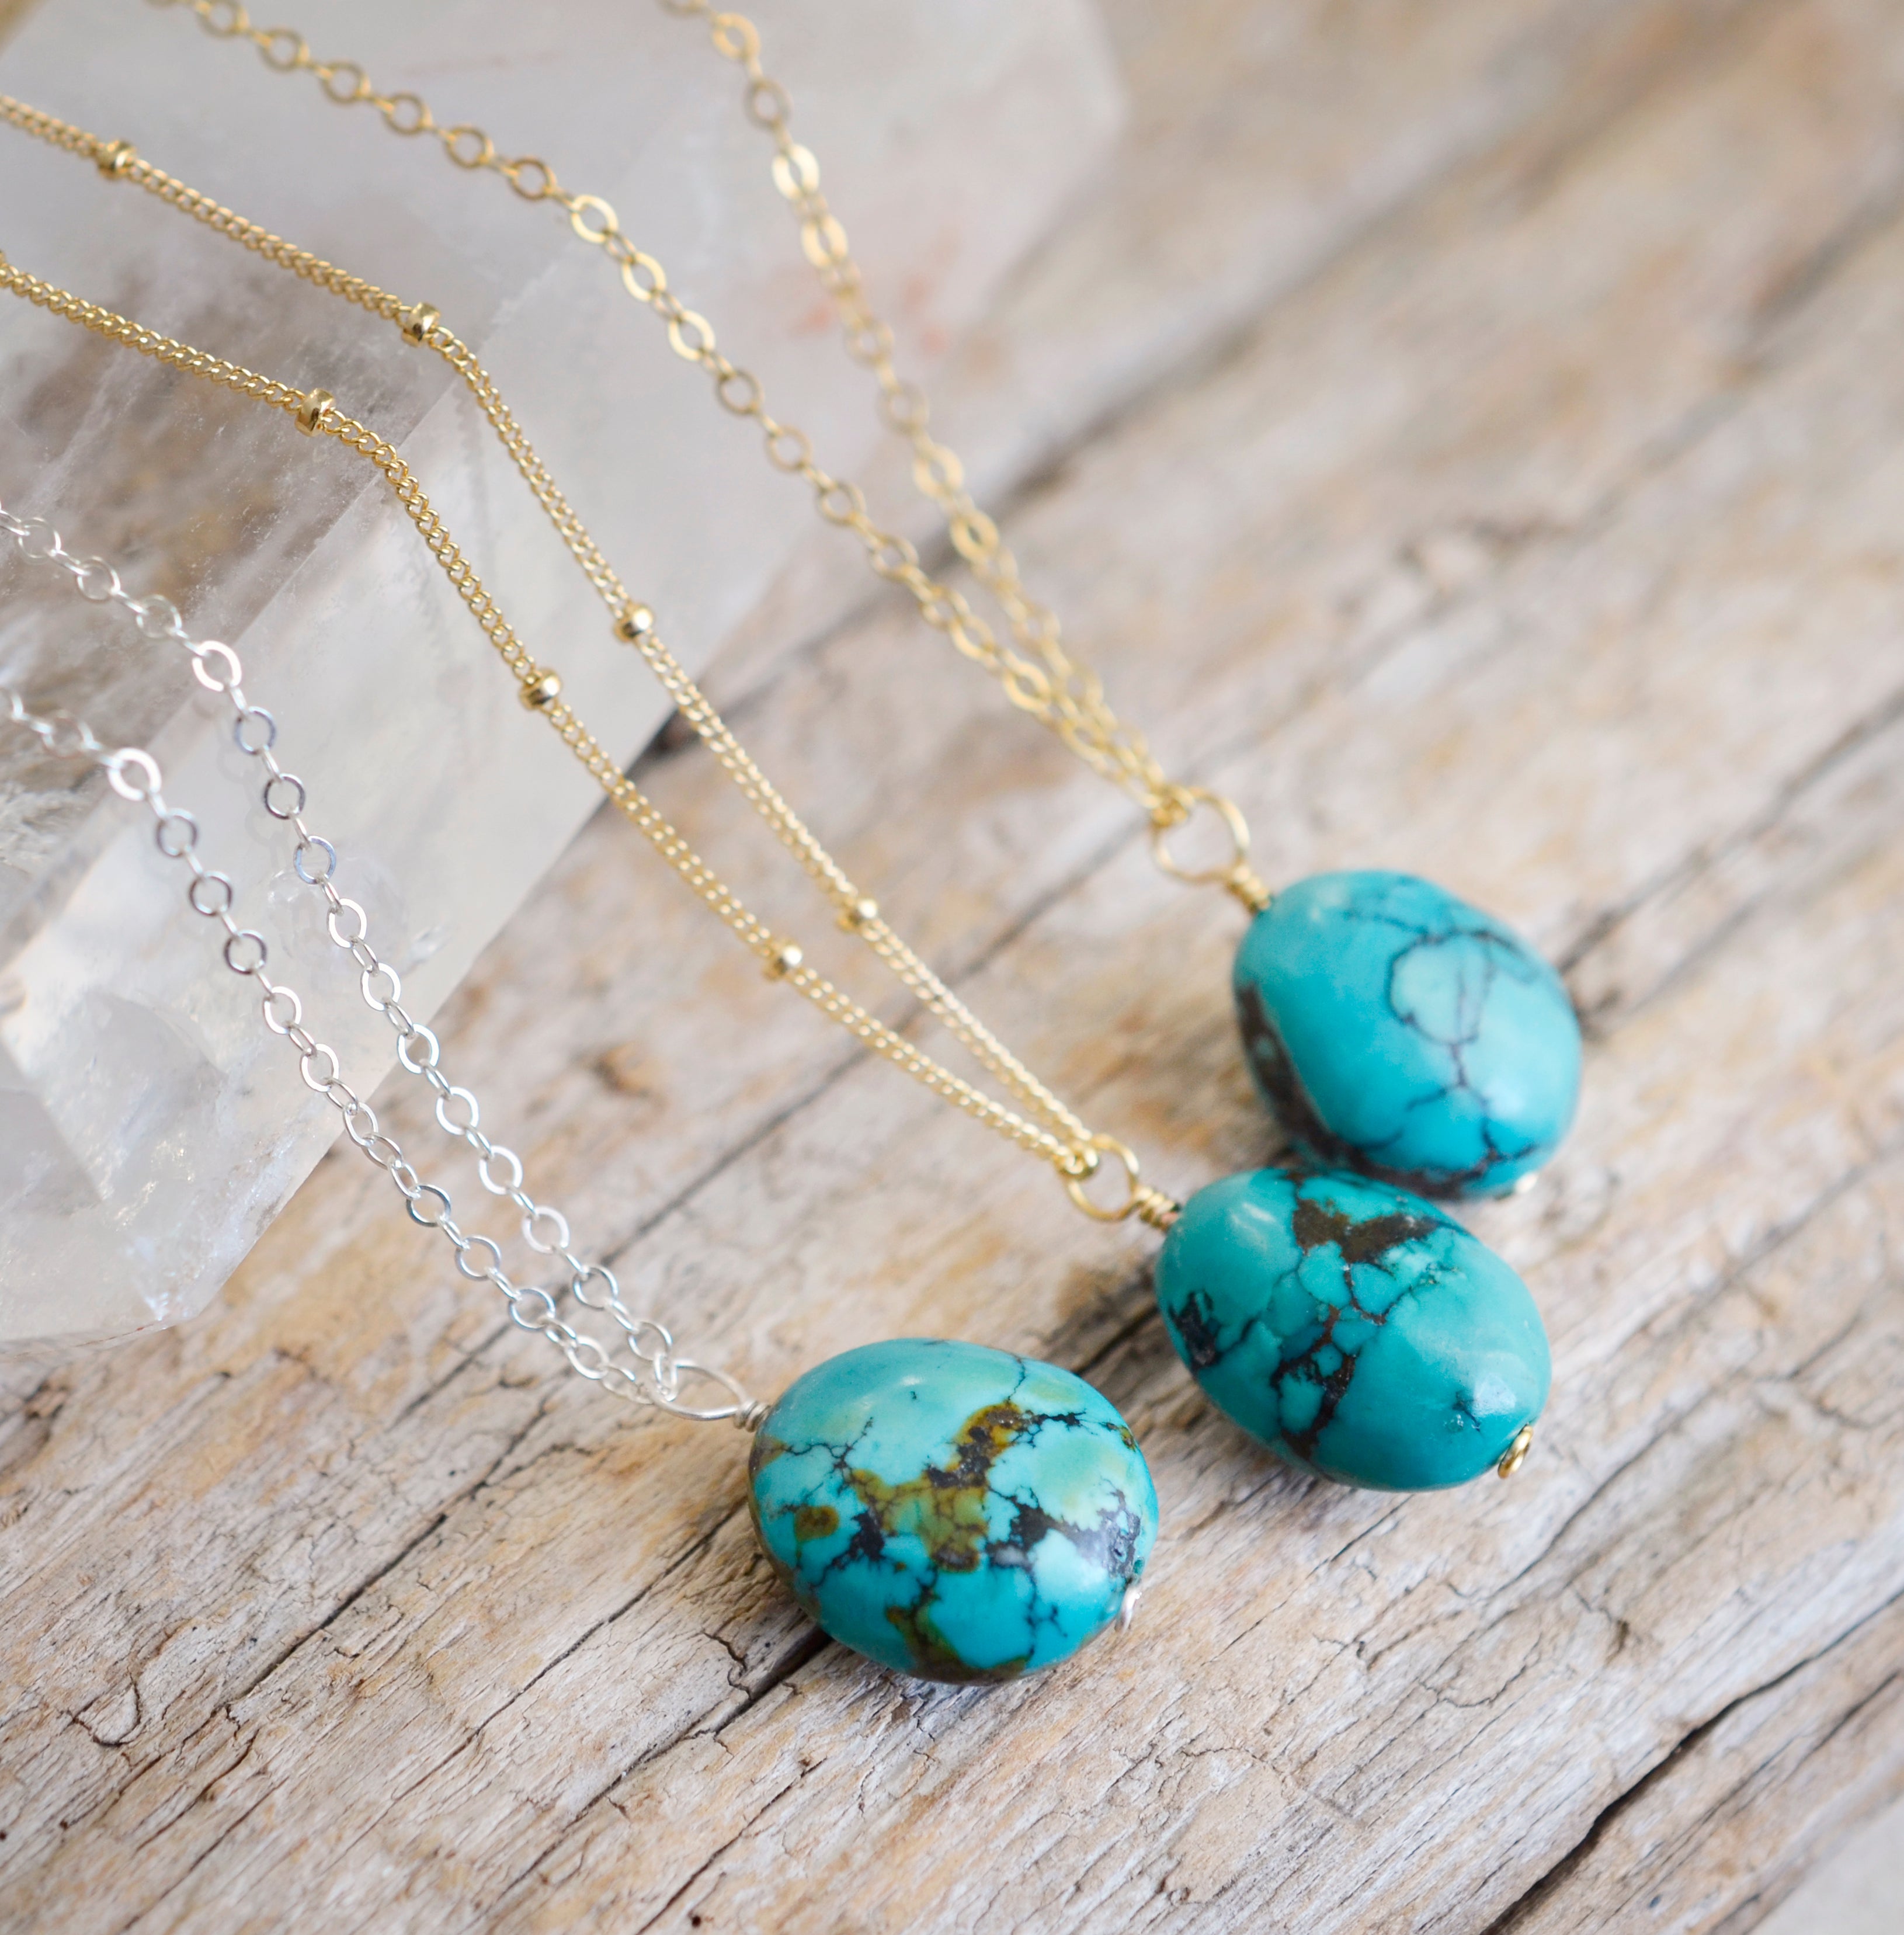 Chunky Turquoise Necklace with Brass Balls - HagarTalmor.com